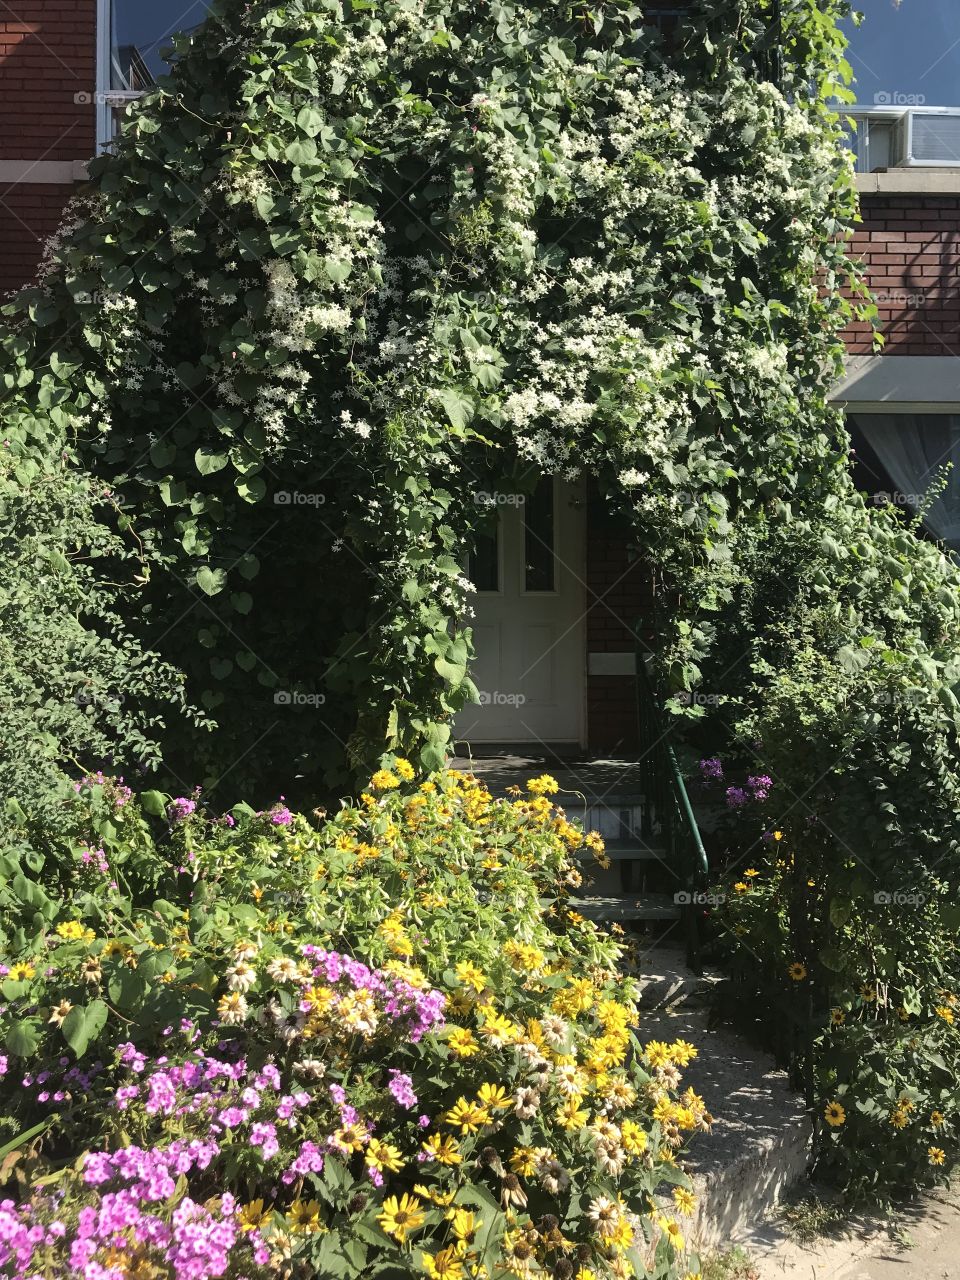 House covered in flowers and vines in the Rosemont neighborhood of Montreal